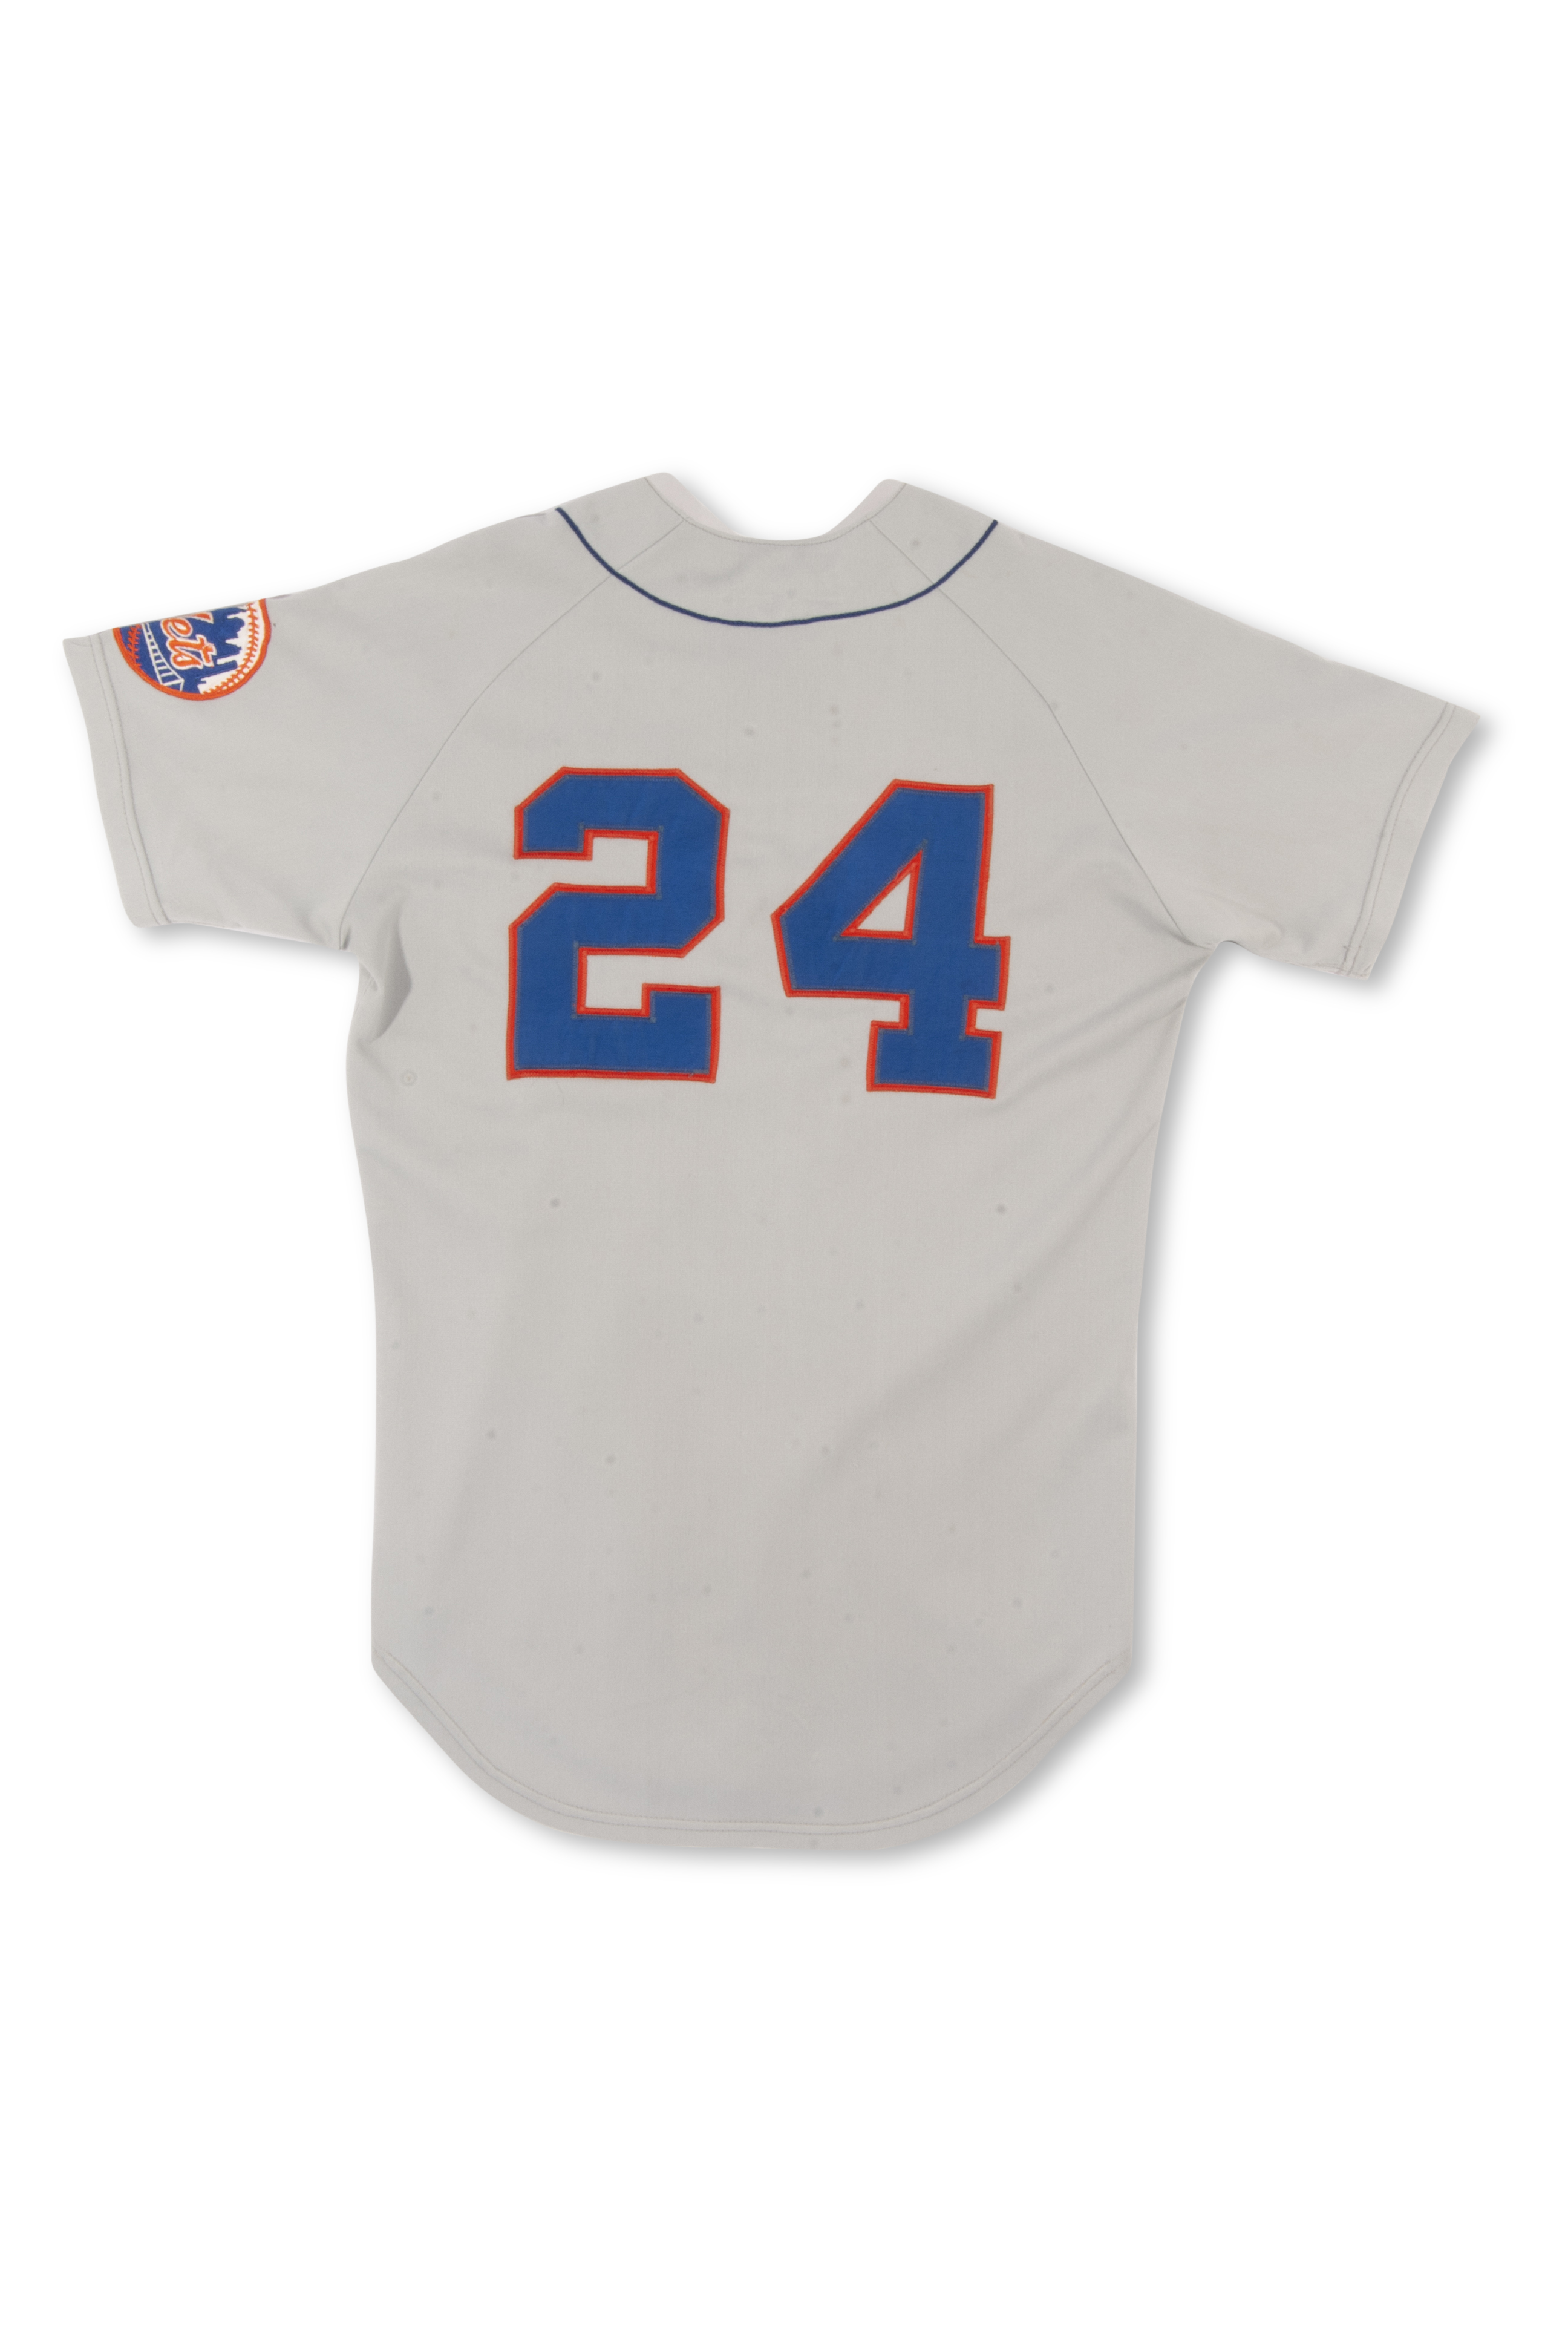 Sell or Auction Used 1973 Willie Mays Game Worn New York Mets Jersey